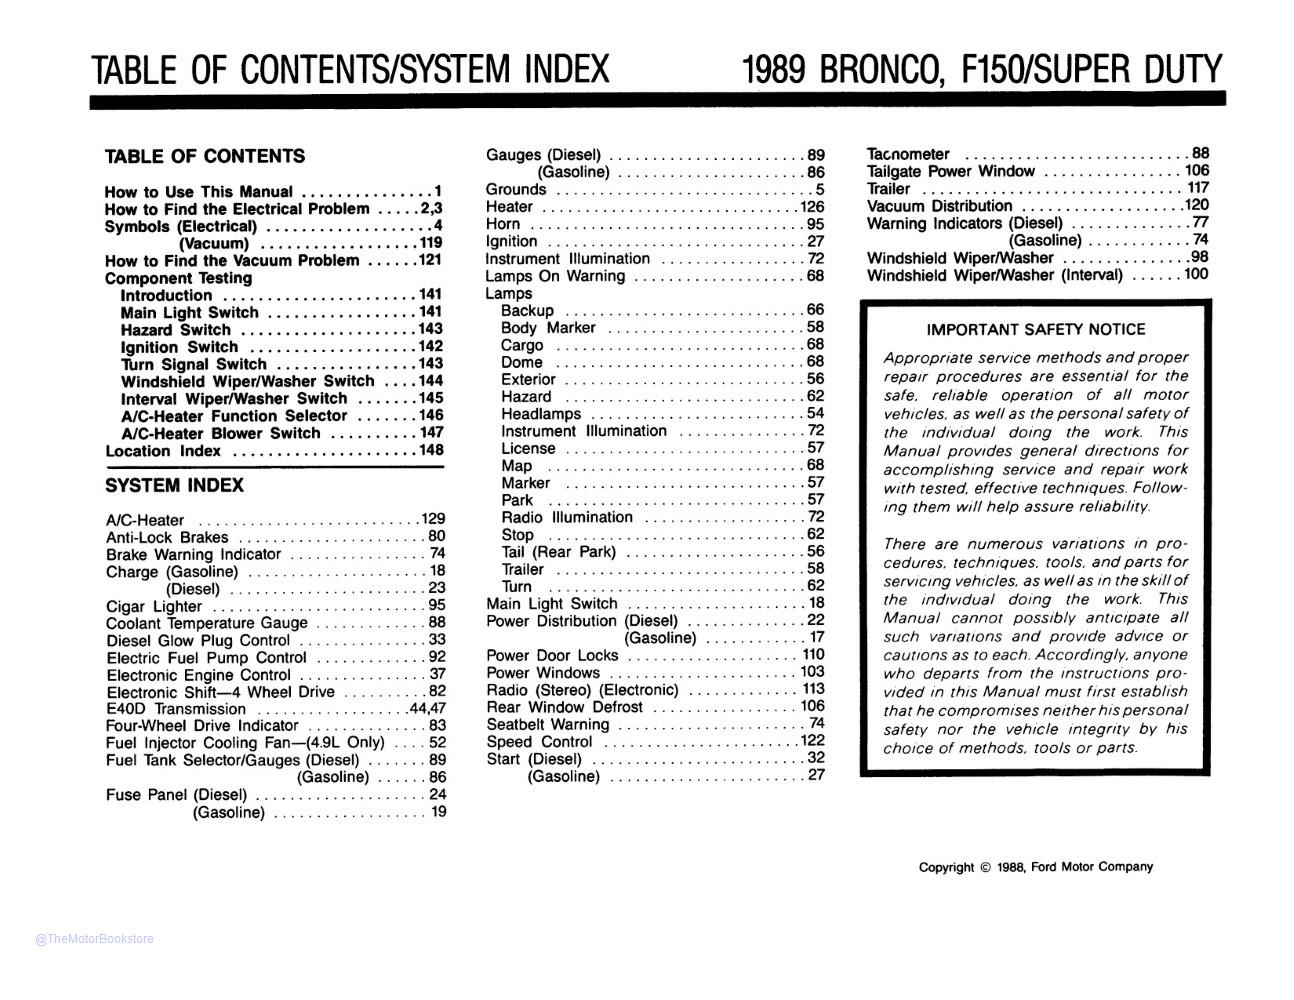 1989 Ford F-Series Truck Electrical Vacuum Troubleshooting Manual  - Table of Contents